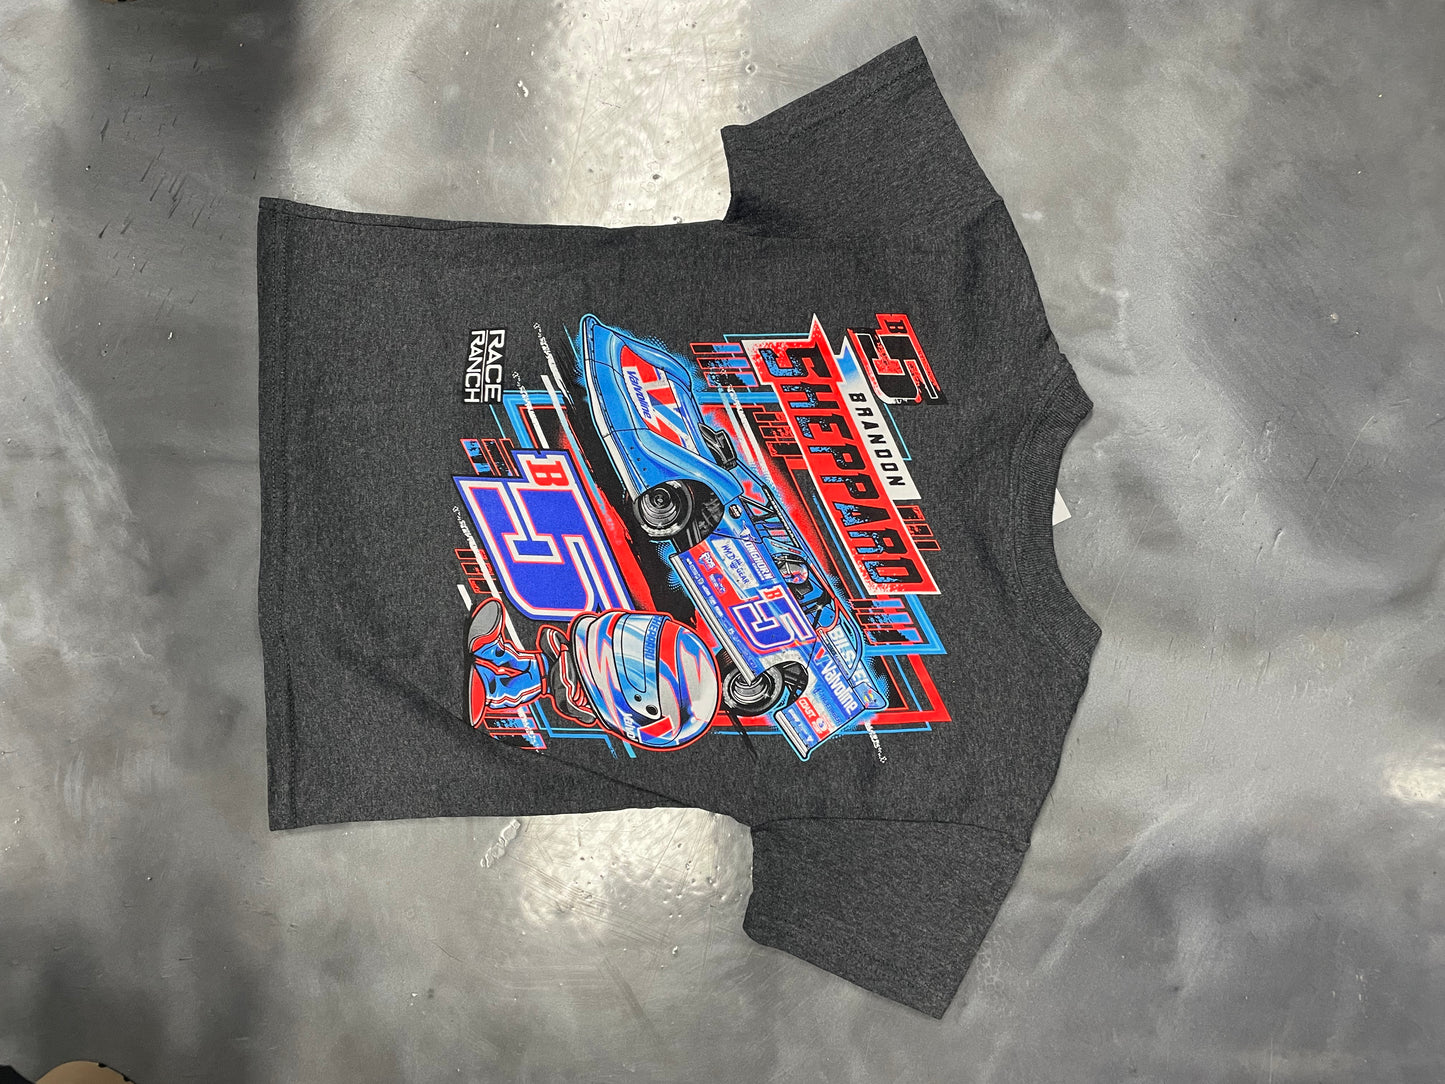 INFANT & YOUTH "LIL' SHEPP" TEE